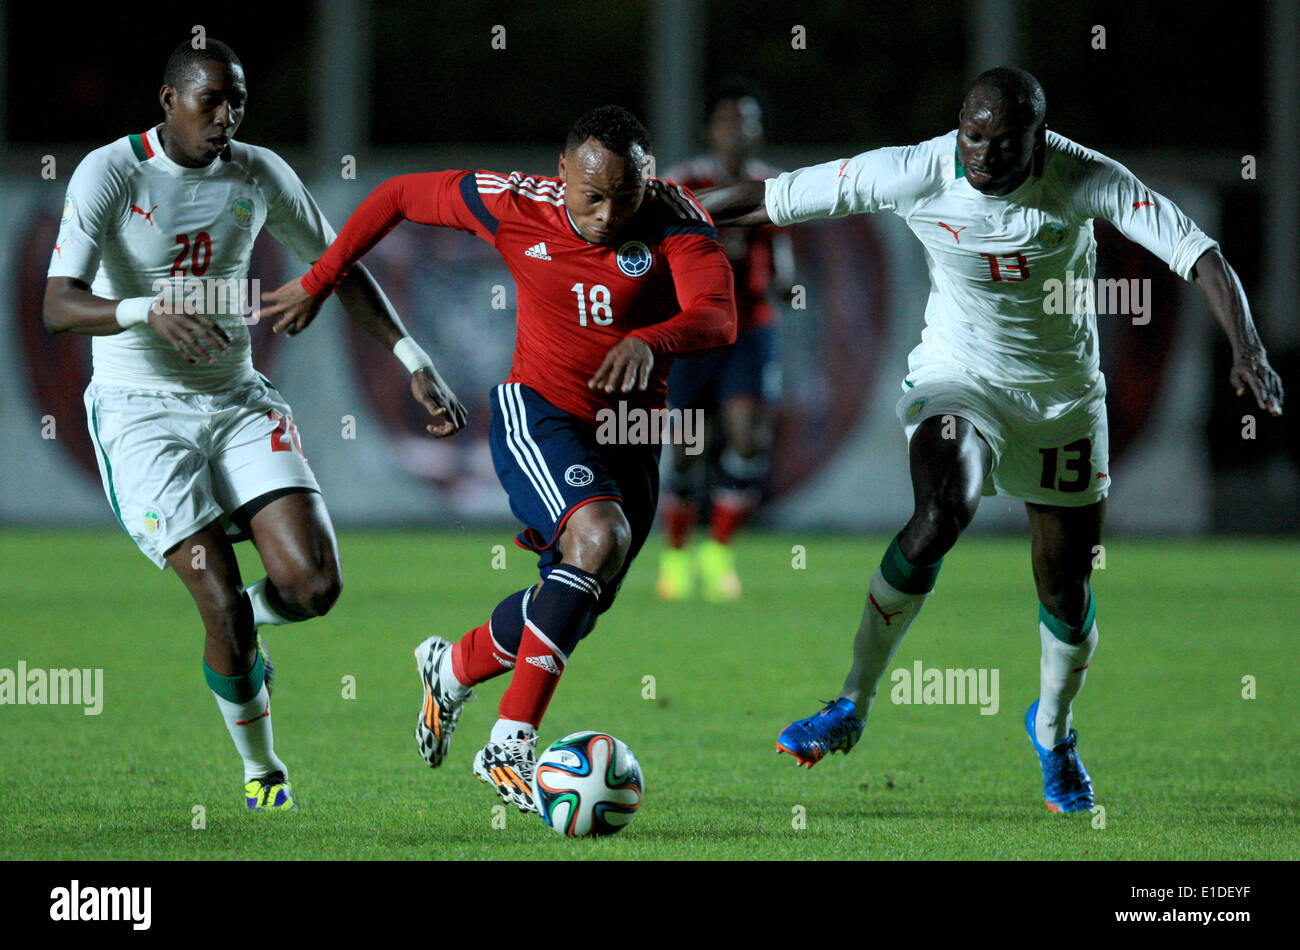 Buenos Aires, Argentina. 31st May, 2014. Camilo Zuniga (C) of Colombia vies for the ball with Mohamed El Habib Daf (L) and Ibrahima Khaliloulah Seck of Senegal during a friendly soccer match in Buenos Aires, capital of Argentina, on May 31, 2014. © Martin Zabala/Xinhua/Alamy Live News Stock Photo